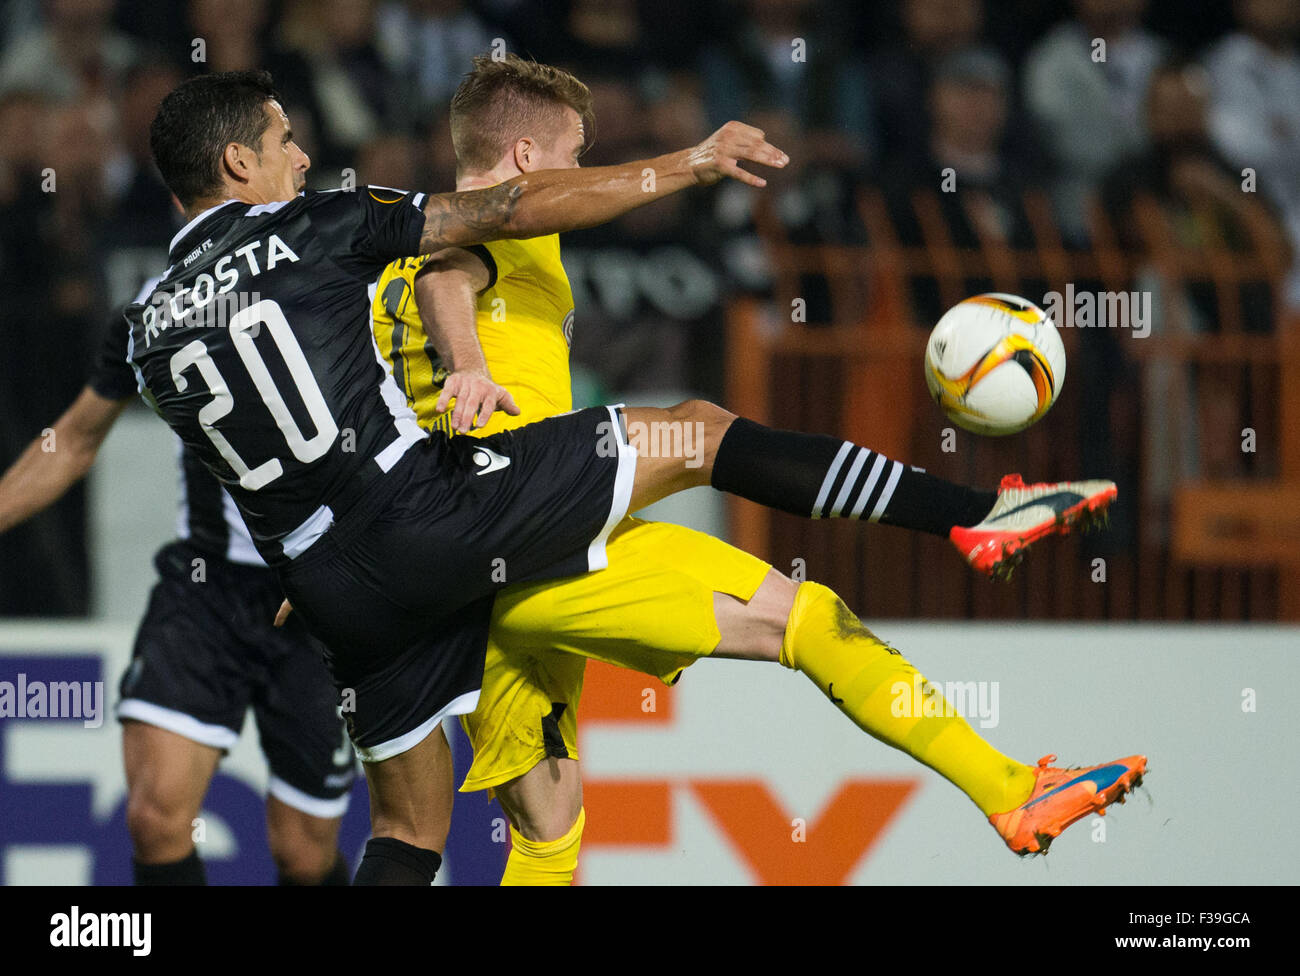 Thessaloniki, Greece. 01st Oct, 2015. Dortmund's Marco Reus (R) in action with Saloniki's Ricardo Costa during the UEFA Europa League group C soccer match between PAOK Saloniki and Borussia Dortmund at Toumba Stadion in Thessaloniki, Greece, 01 October 2015. Foto: Bernd Thissen/dpa/Alamy Live News Stock Photo